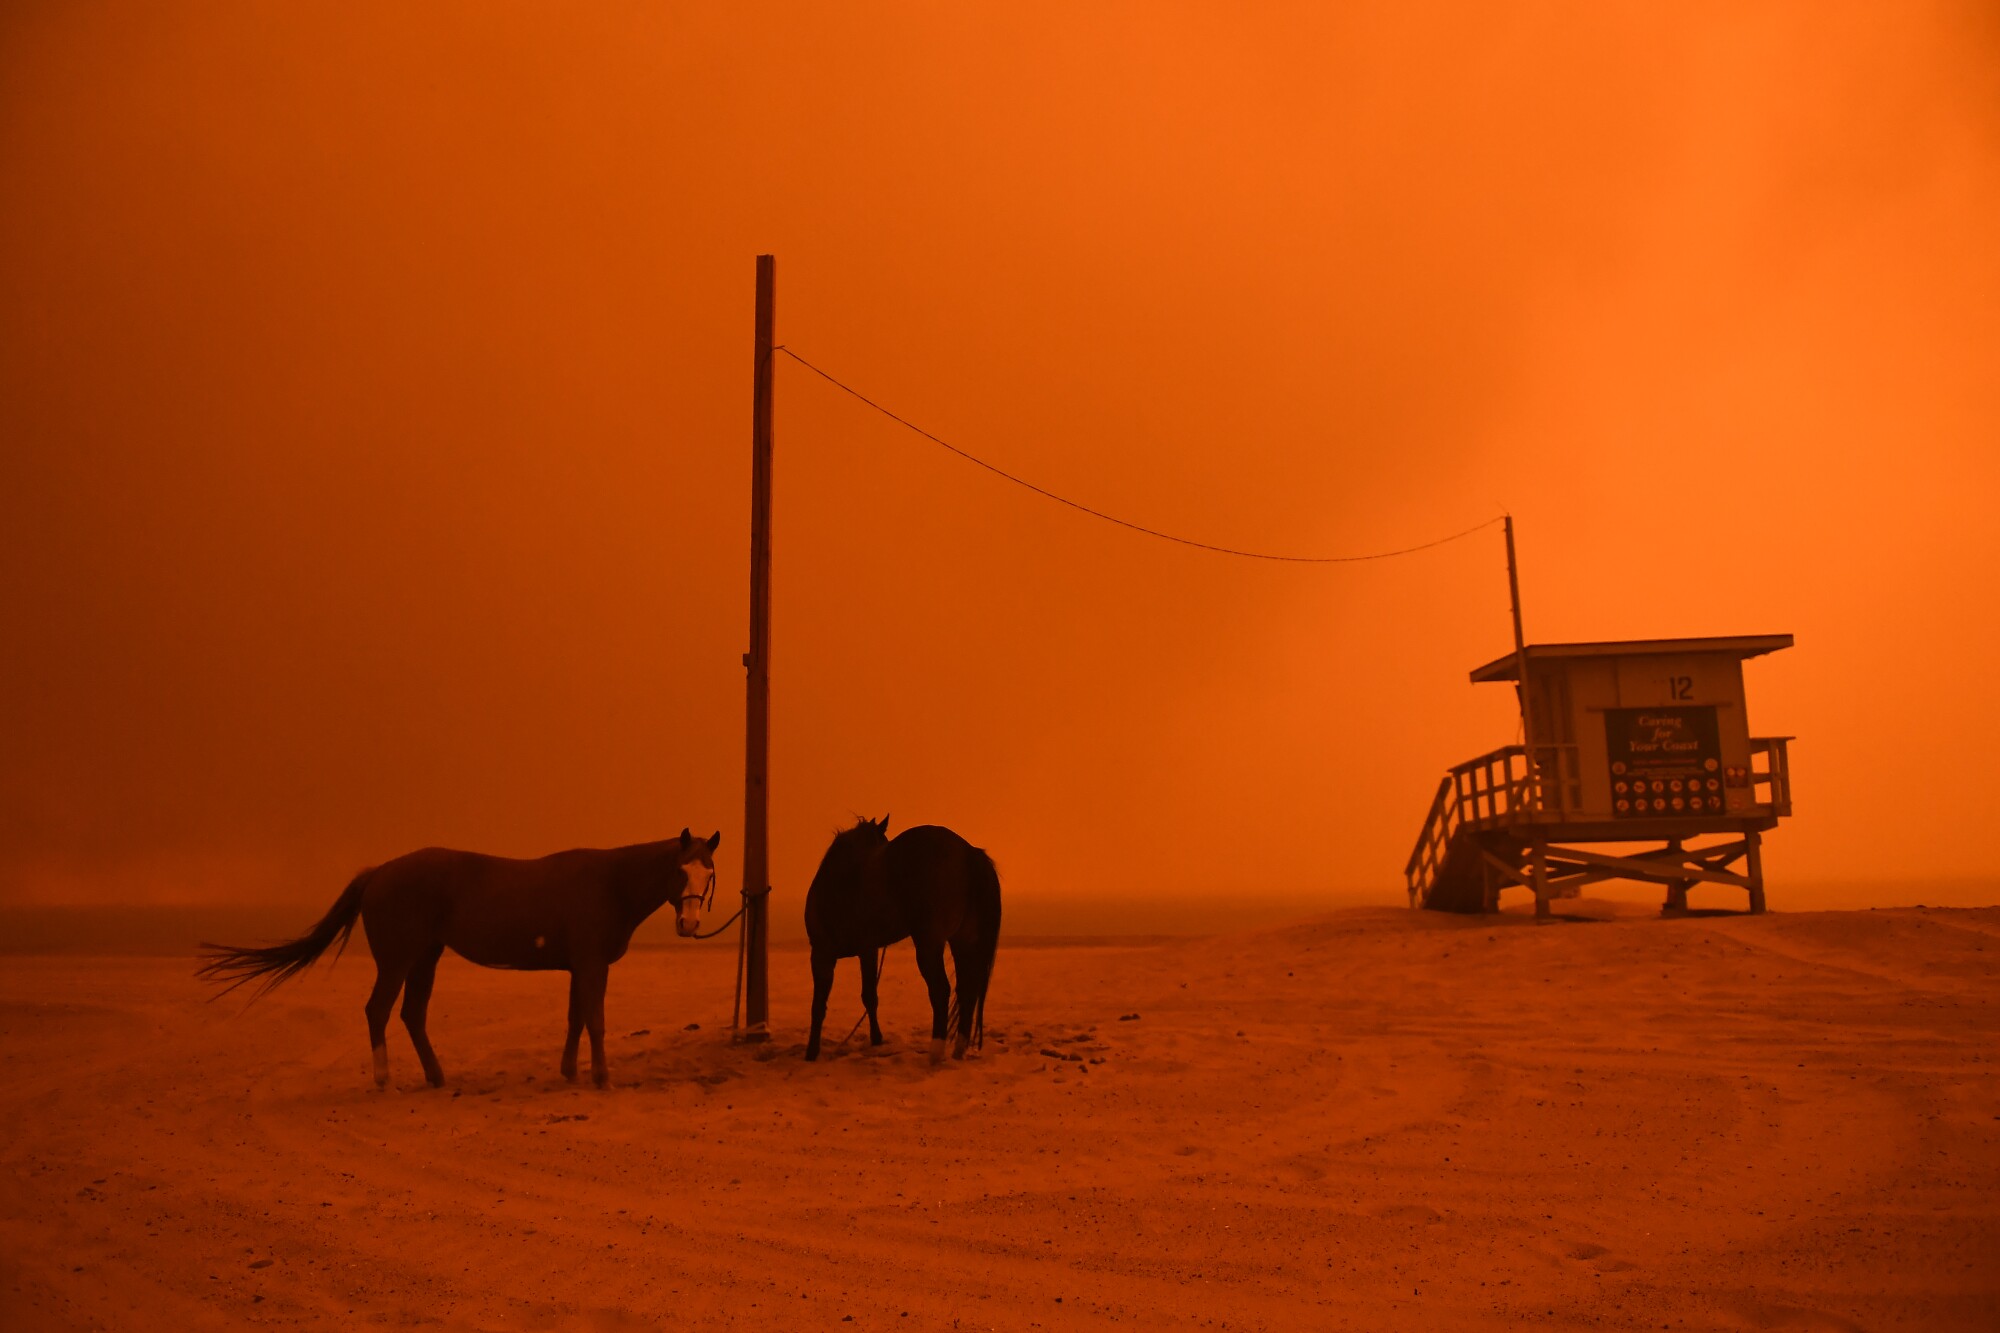 Horses are tethered to a pole on a beach bathed in an orange glow.